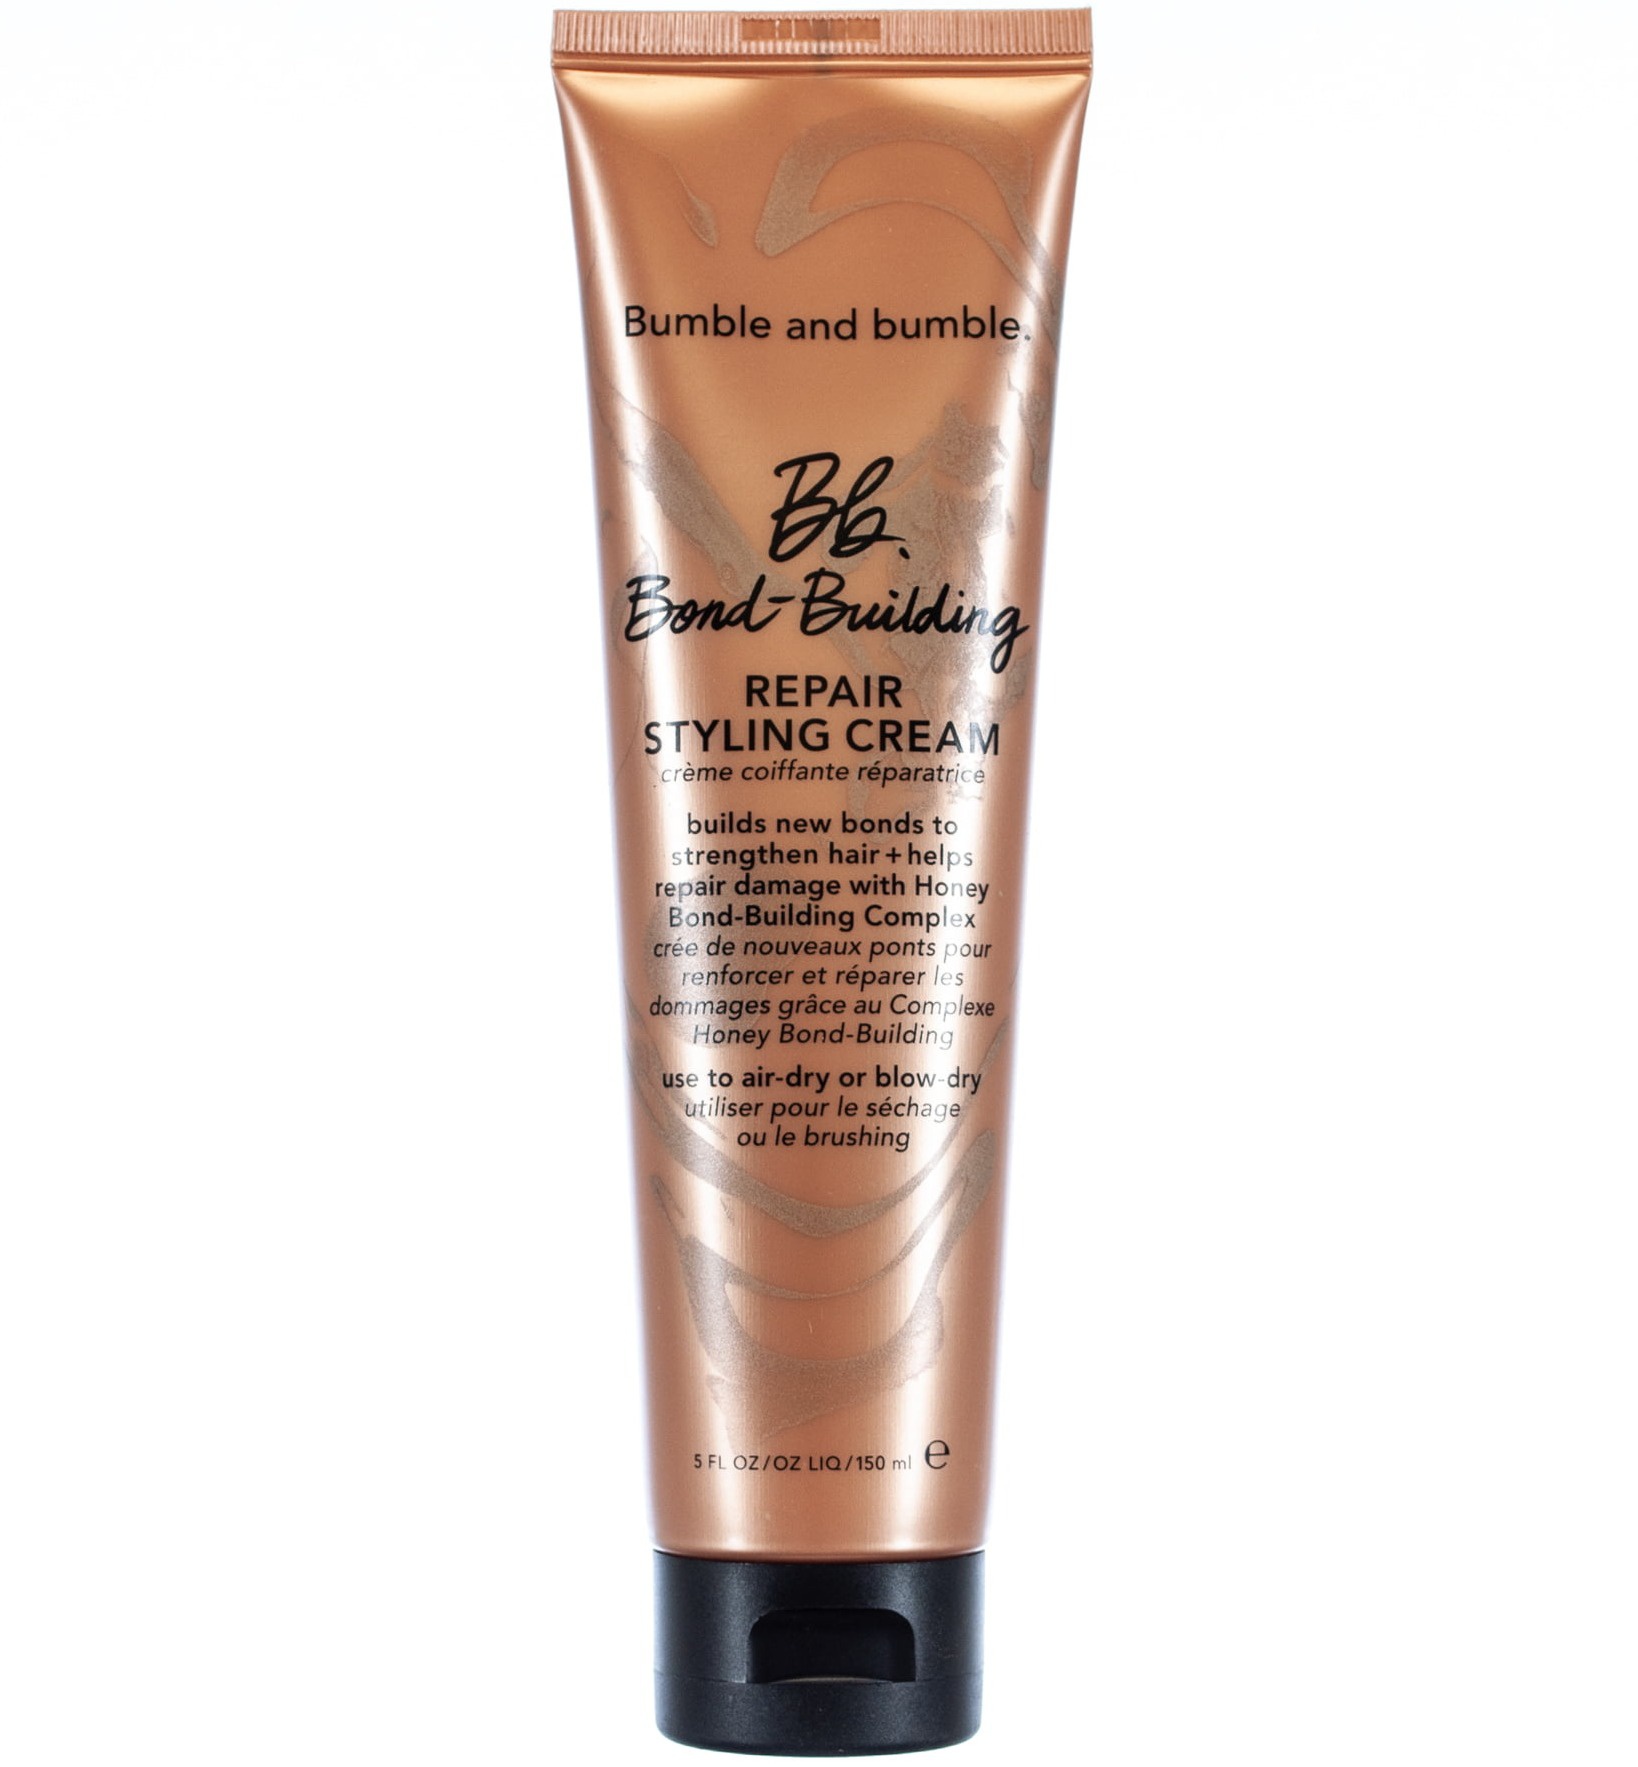 Bumble And Bumble Bond-building Repair Styling Cream